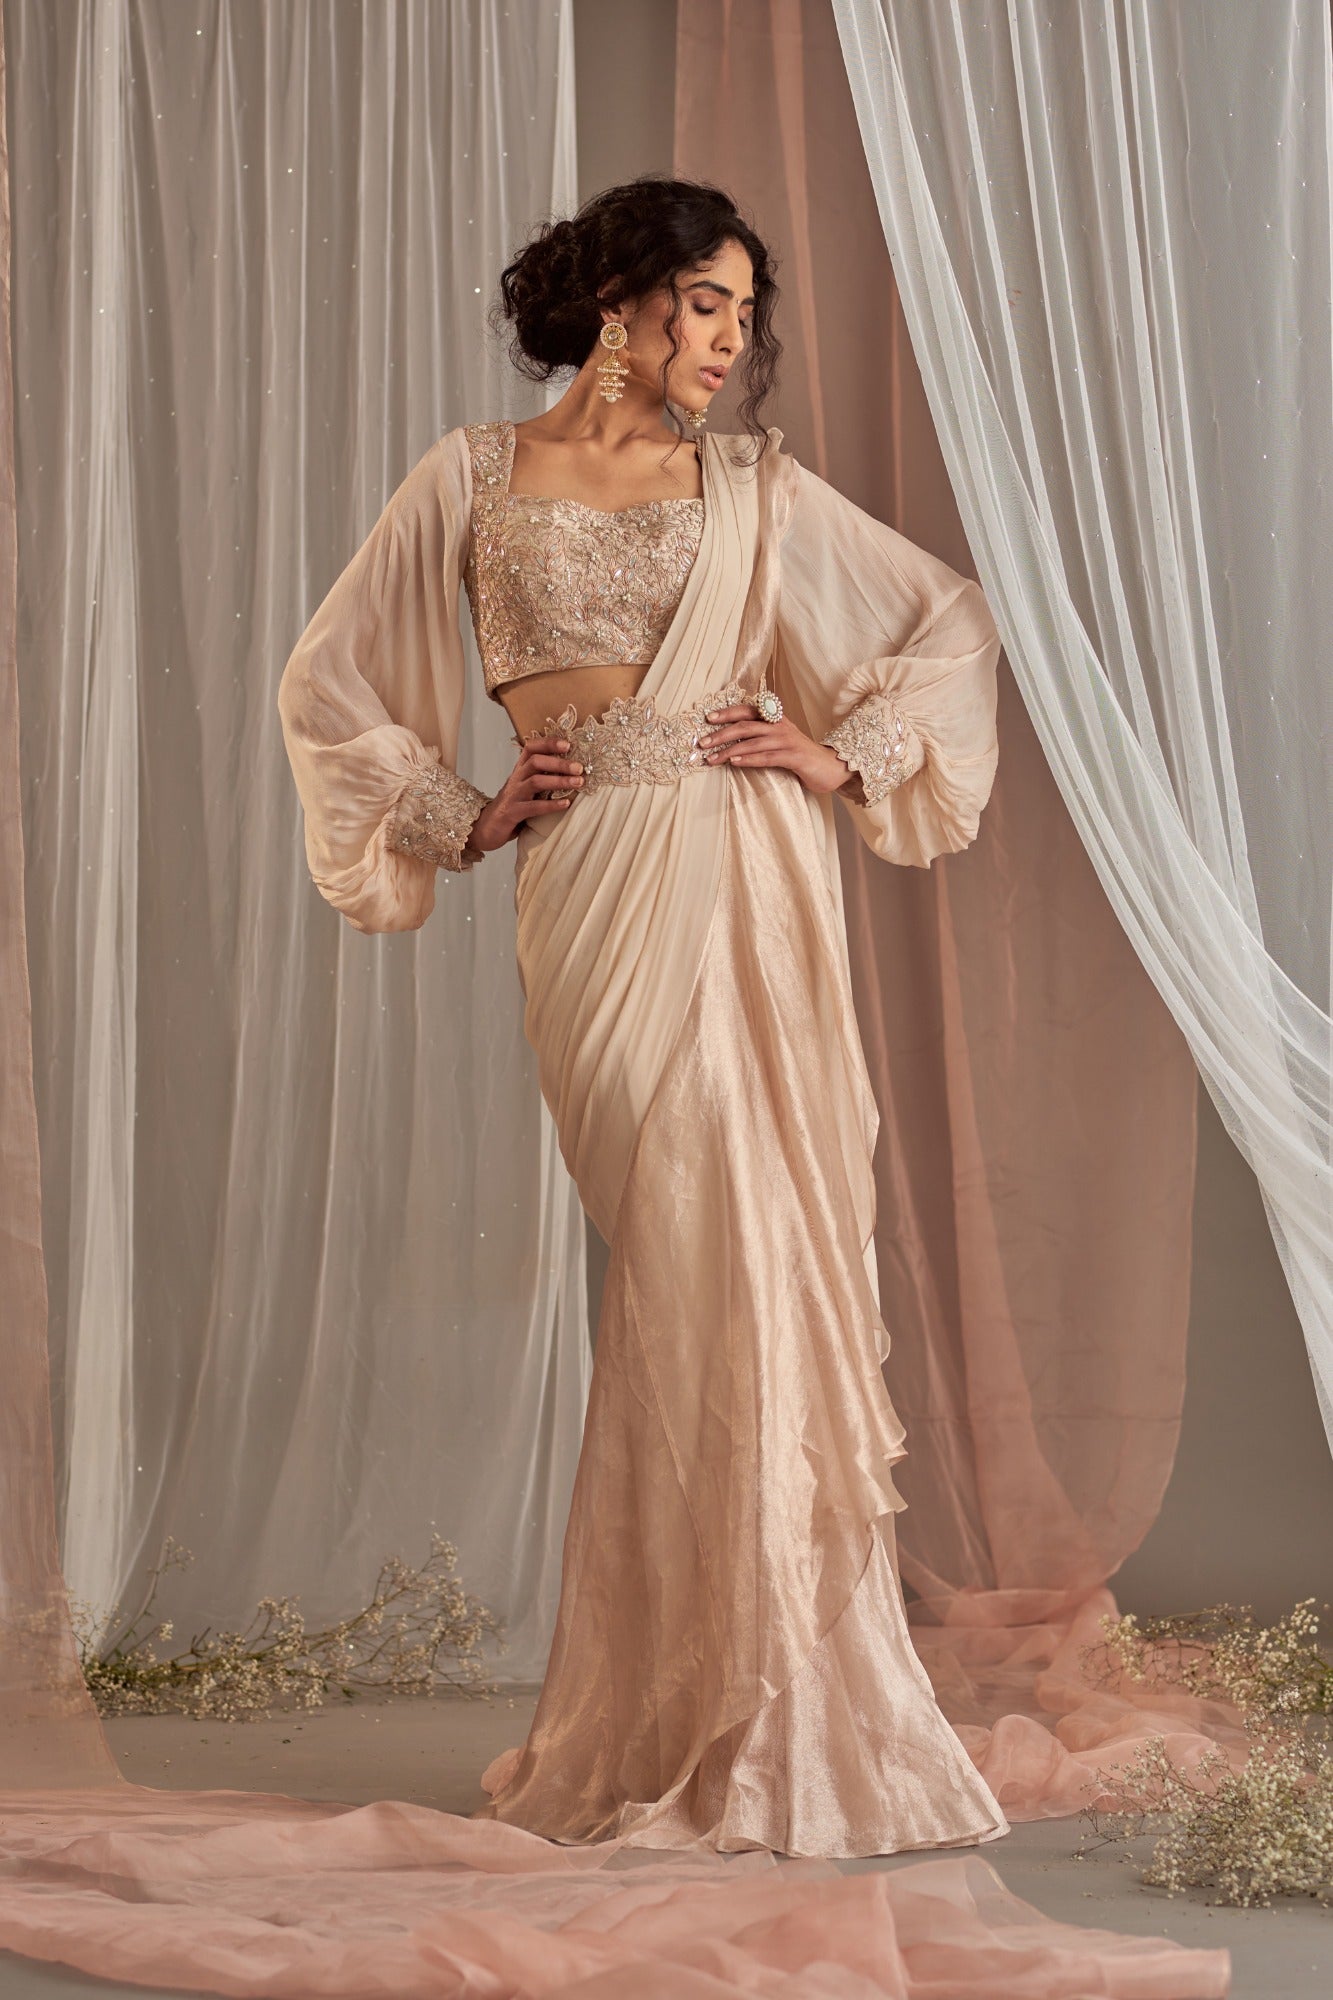 Ivory ruffles saree with pearl embroidered blouse by Ridhi Mehra